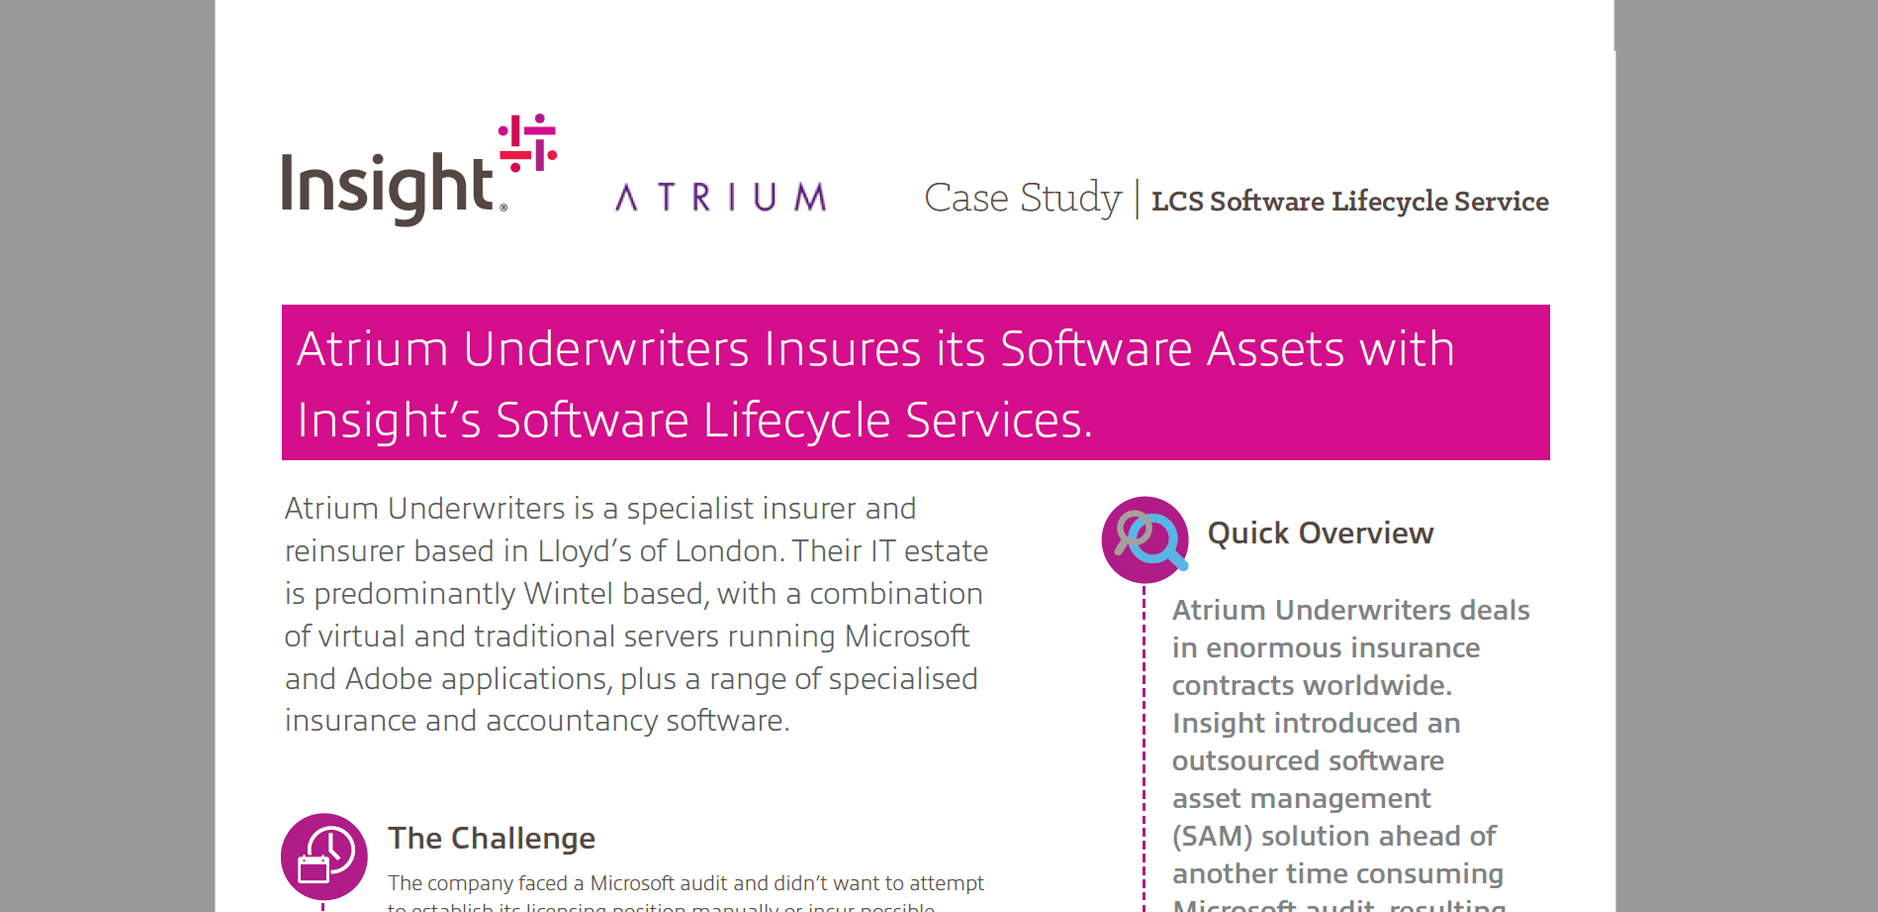 Learn how Insight helped with Atrium's infrastructure